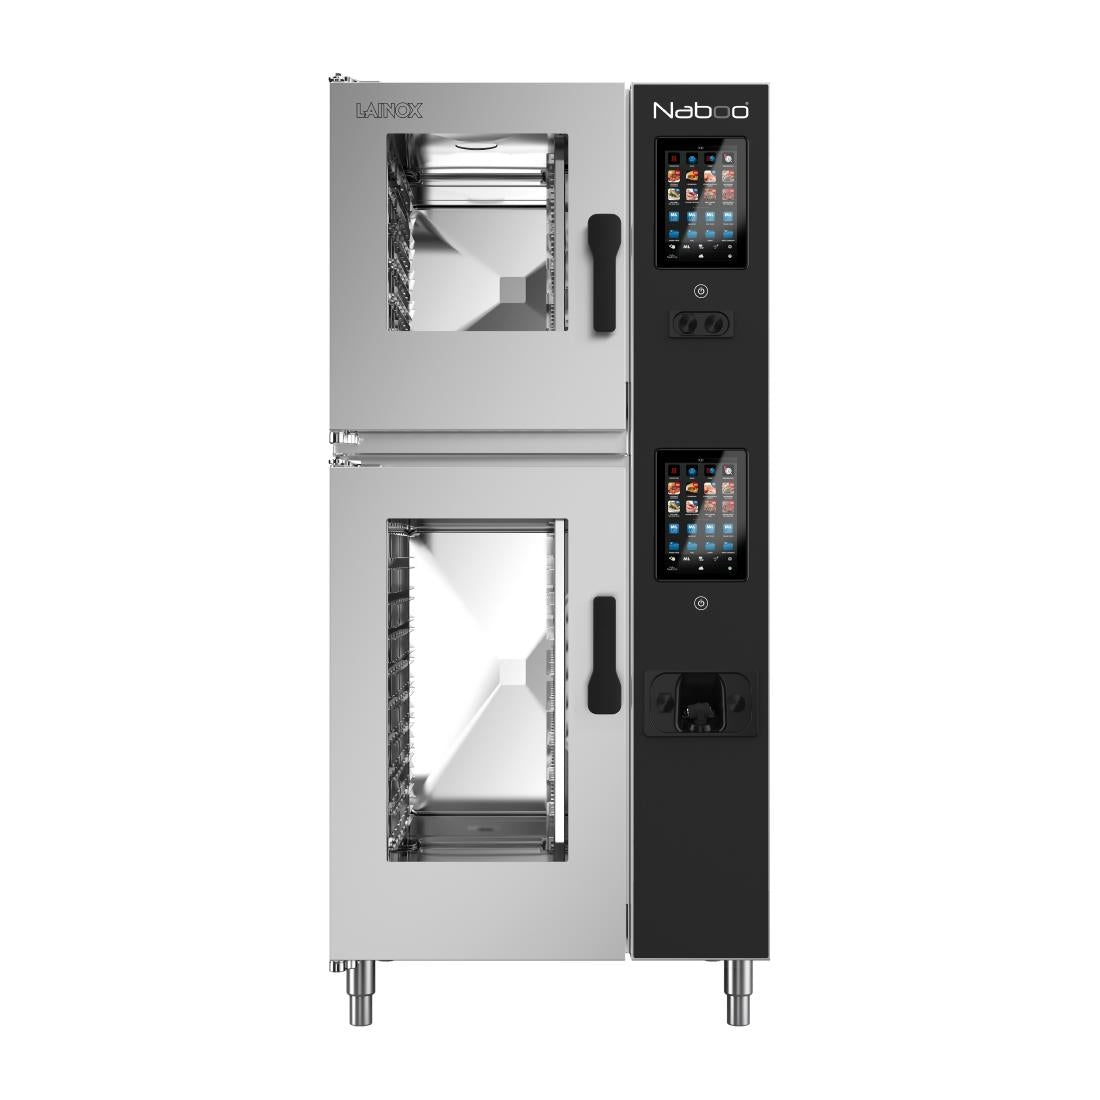 HP563 Lainox Naboo Boosted Gas Touch Screen Combi Oven NAG161BV 16X1/1GN JD Catering Equipment Solutions Ltd